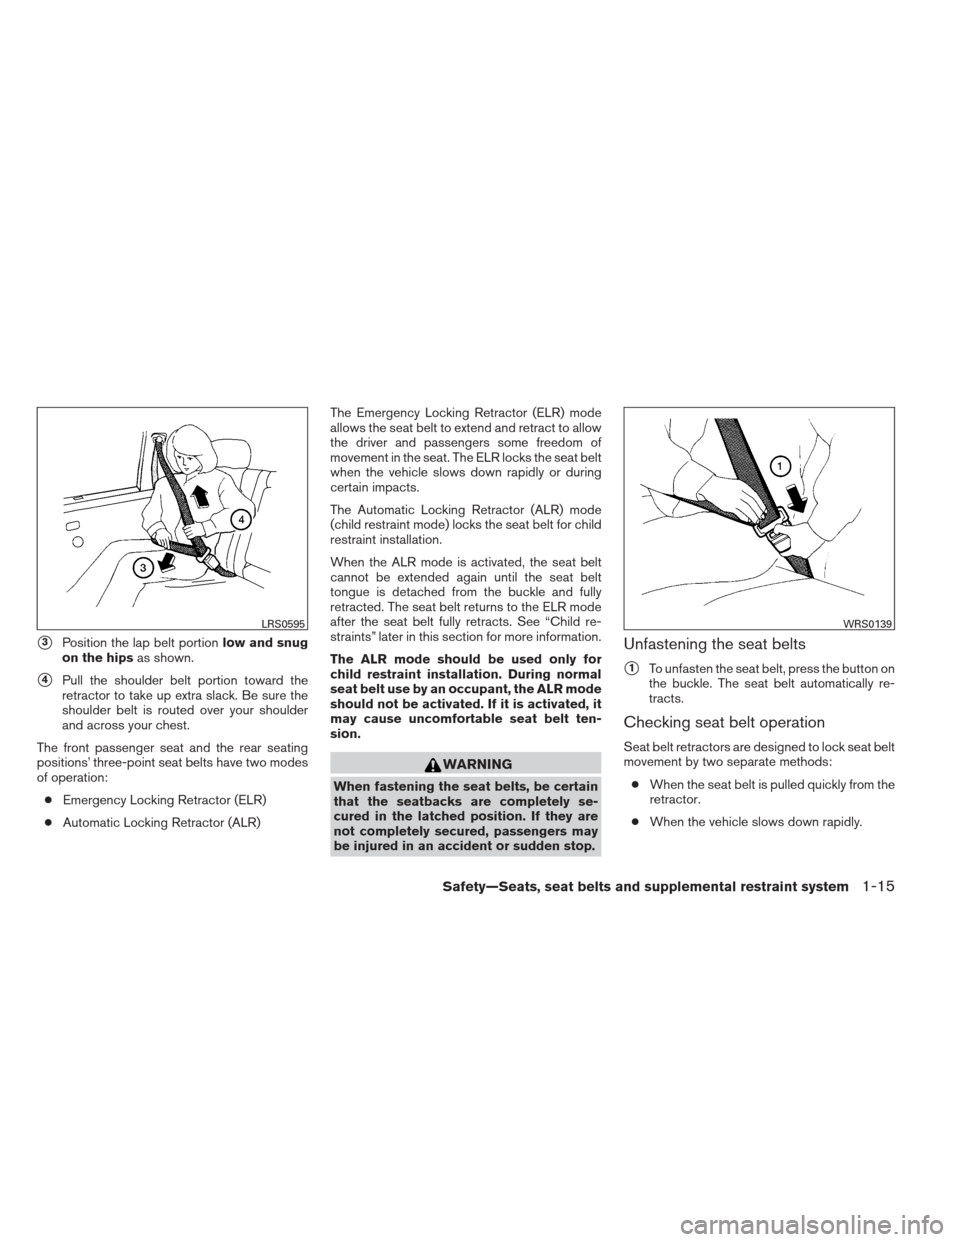 NISSAN ALTIMA 2013 L33 / 5.G Owners Guide 3Position the lap belt portionlow and snug
on the hips as shown.
4Pull the shoulder belt portion toward the
retractor to take up extra slack. Be sure the
shoulder belt is routed over your shoulder
a